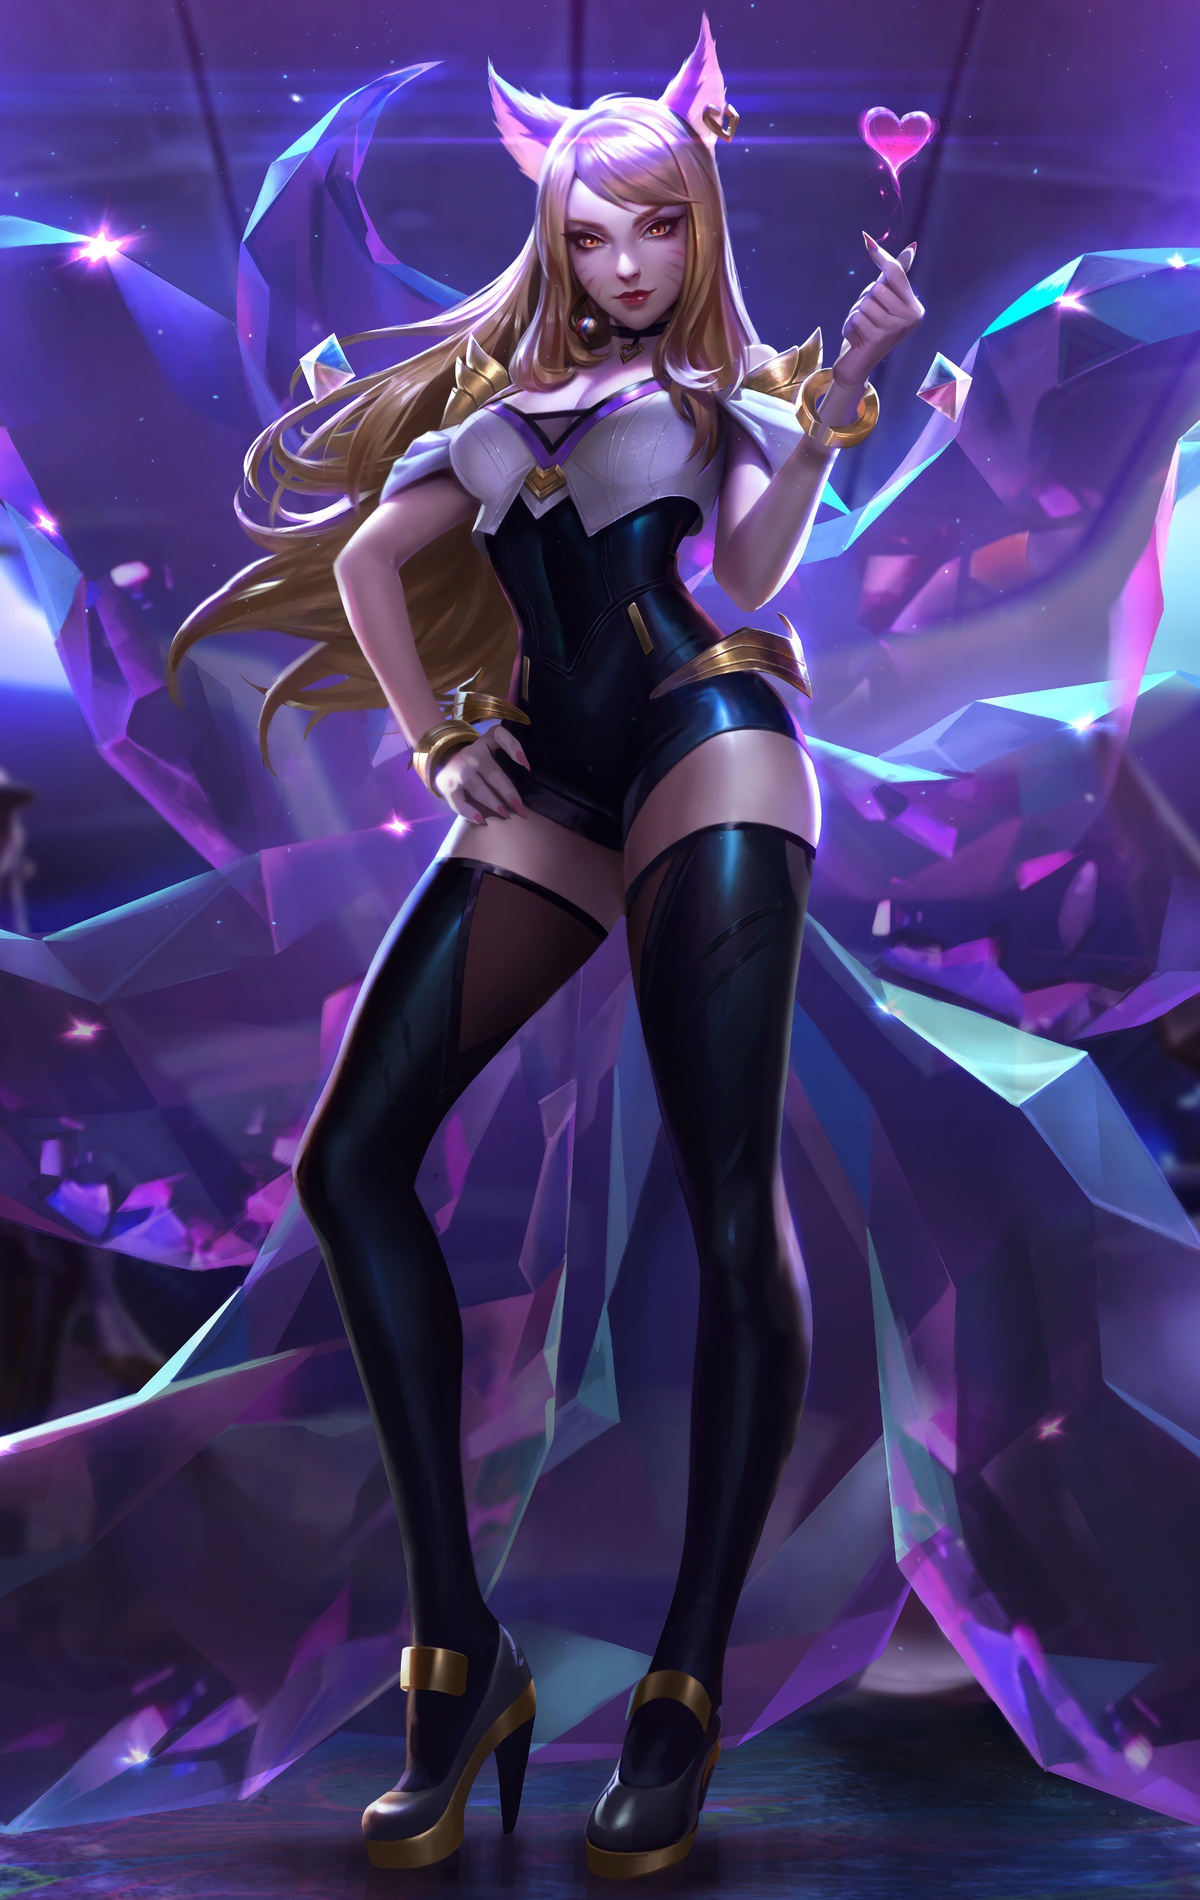 Image: KDA, League of Legends, Ahri, tails, clicking, heart, posture